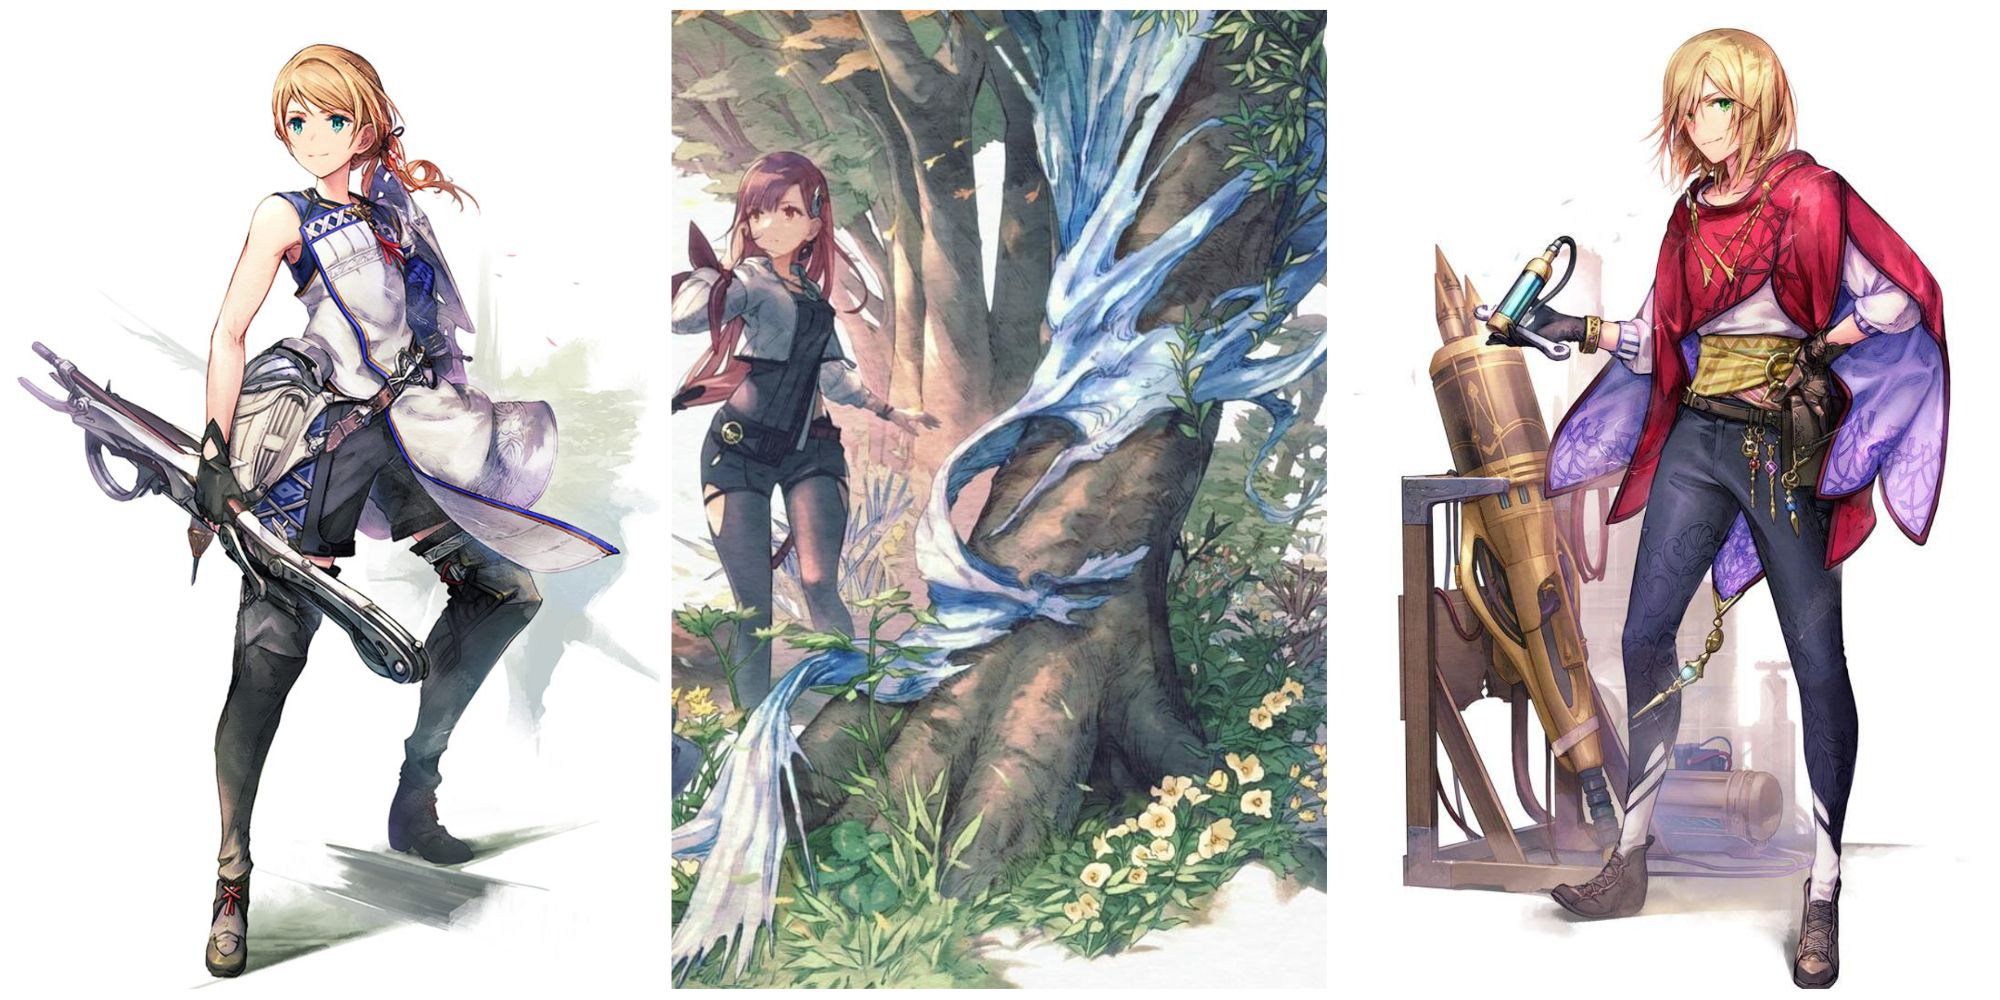 All three pictures are official artwork